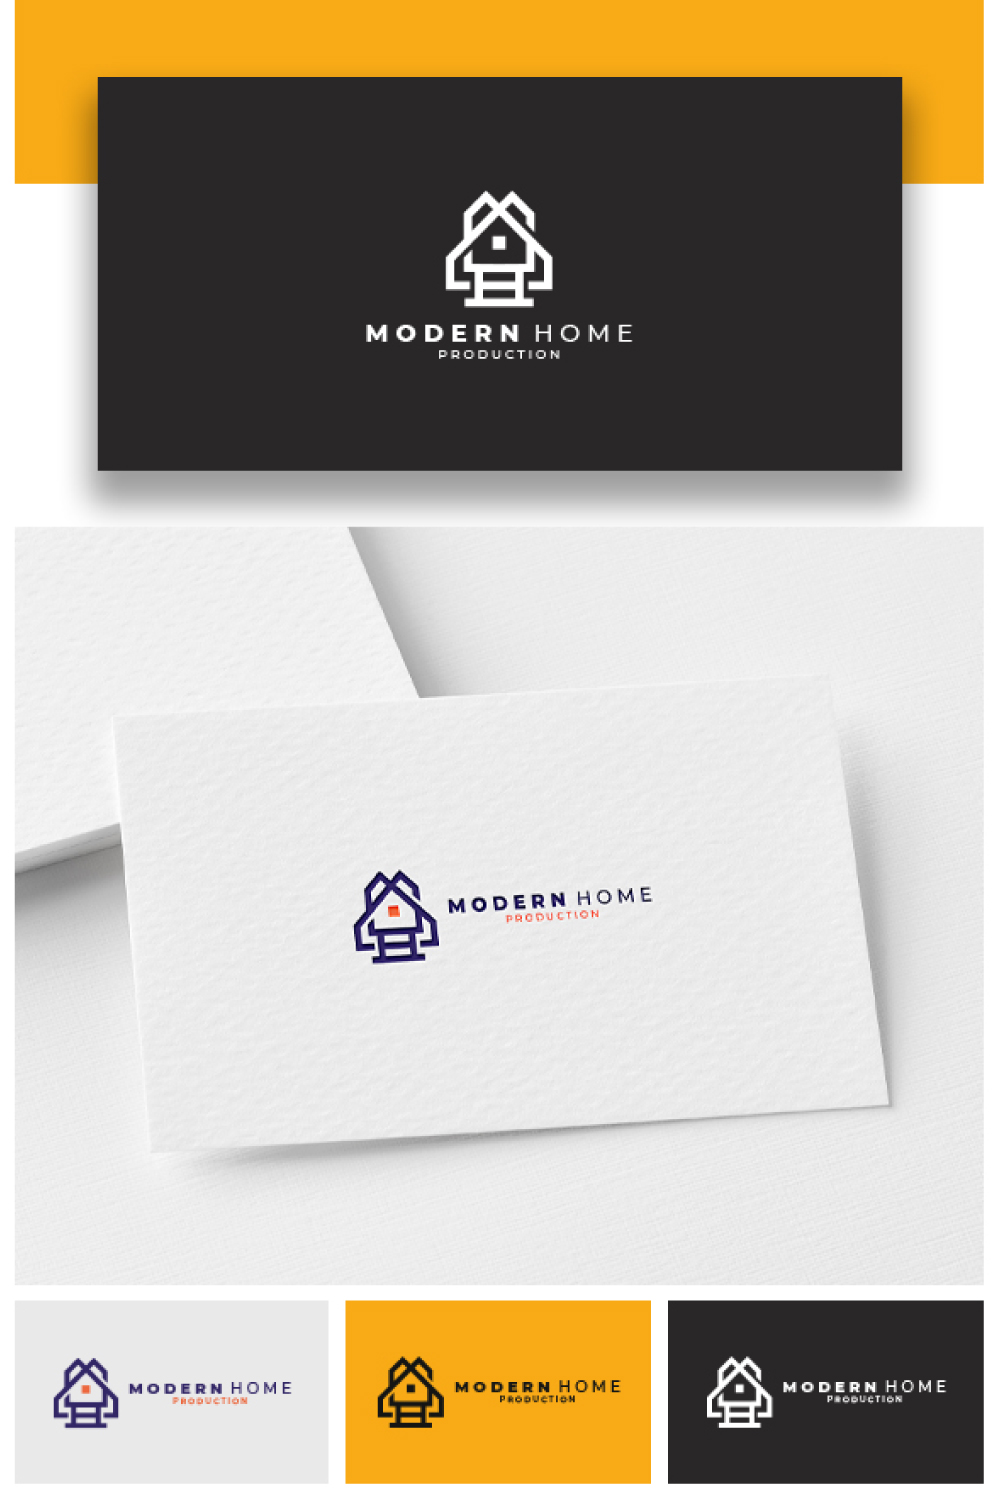 Business card with a house logo on it.